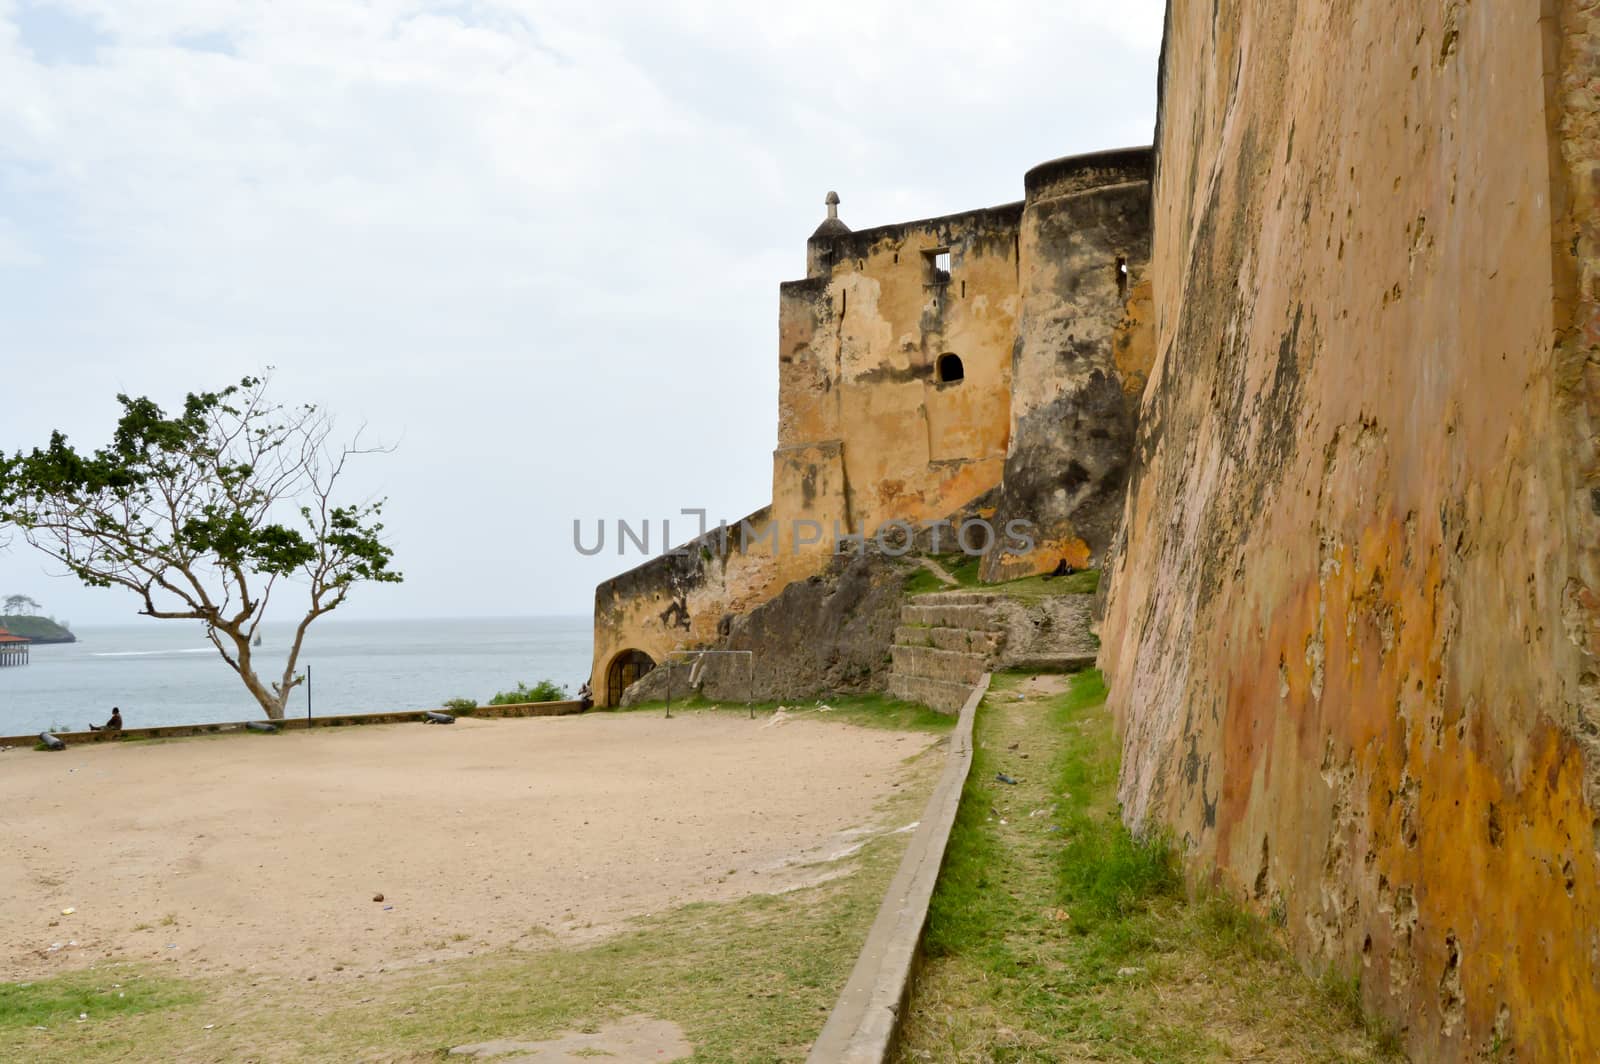 Surrounding wall of the fortress of Mombasa in Kenya with black grid and the ocean in the background